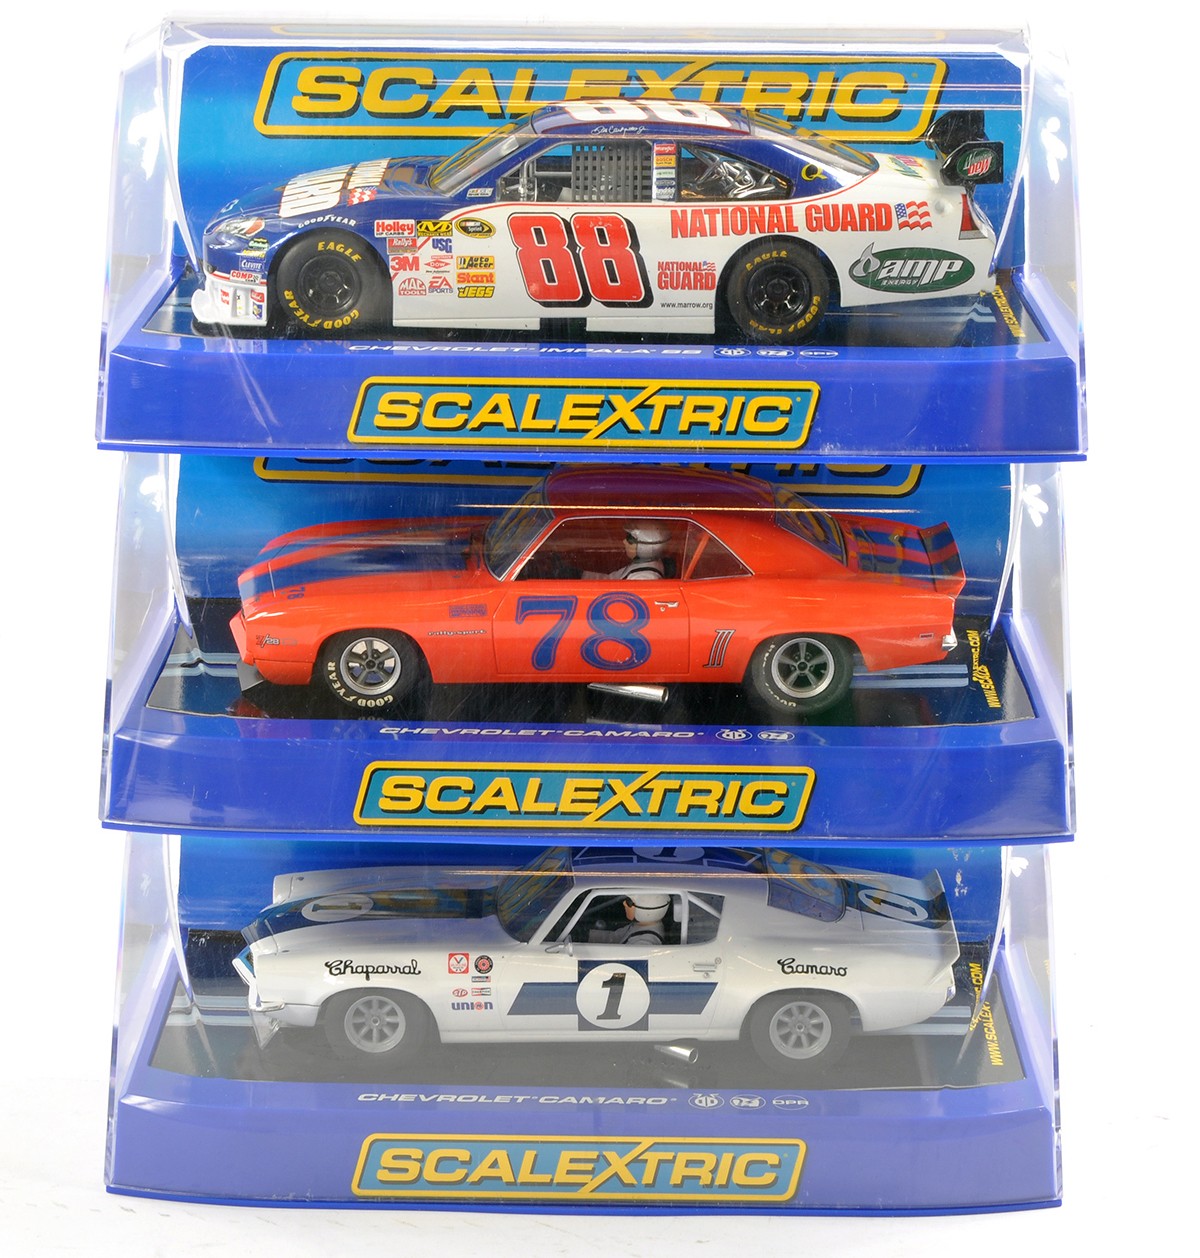 Slot Car Scalextric 1/32 issues comprising C2958 Chevrolet Impala SS Dale Earnhardt National